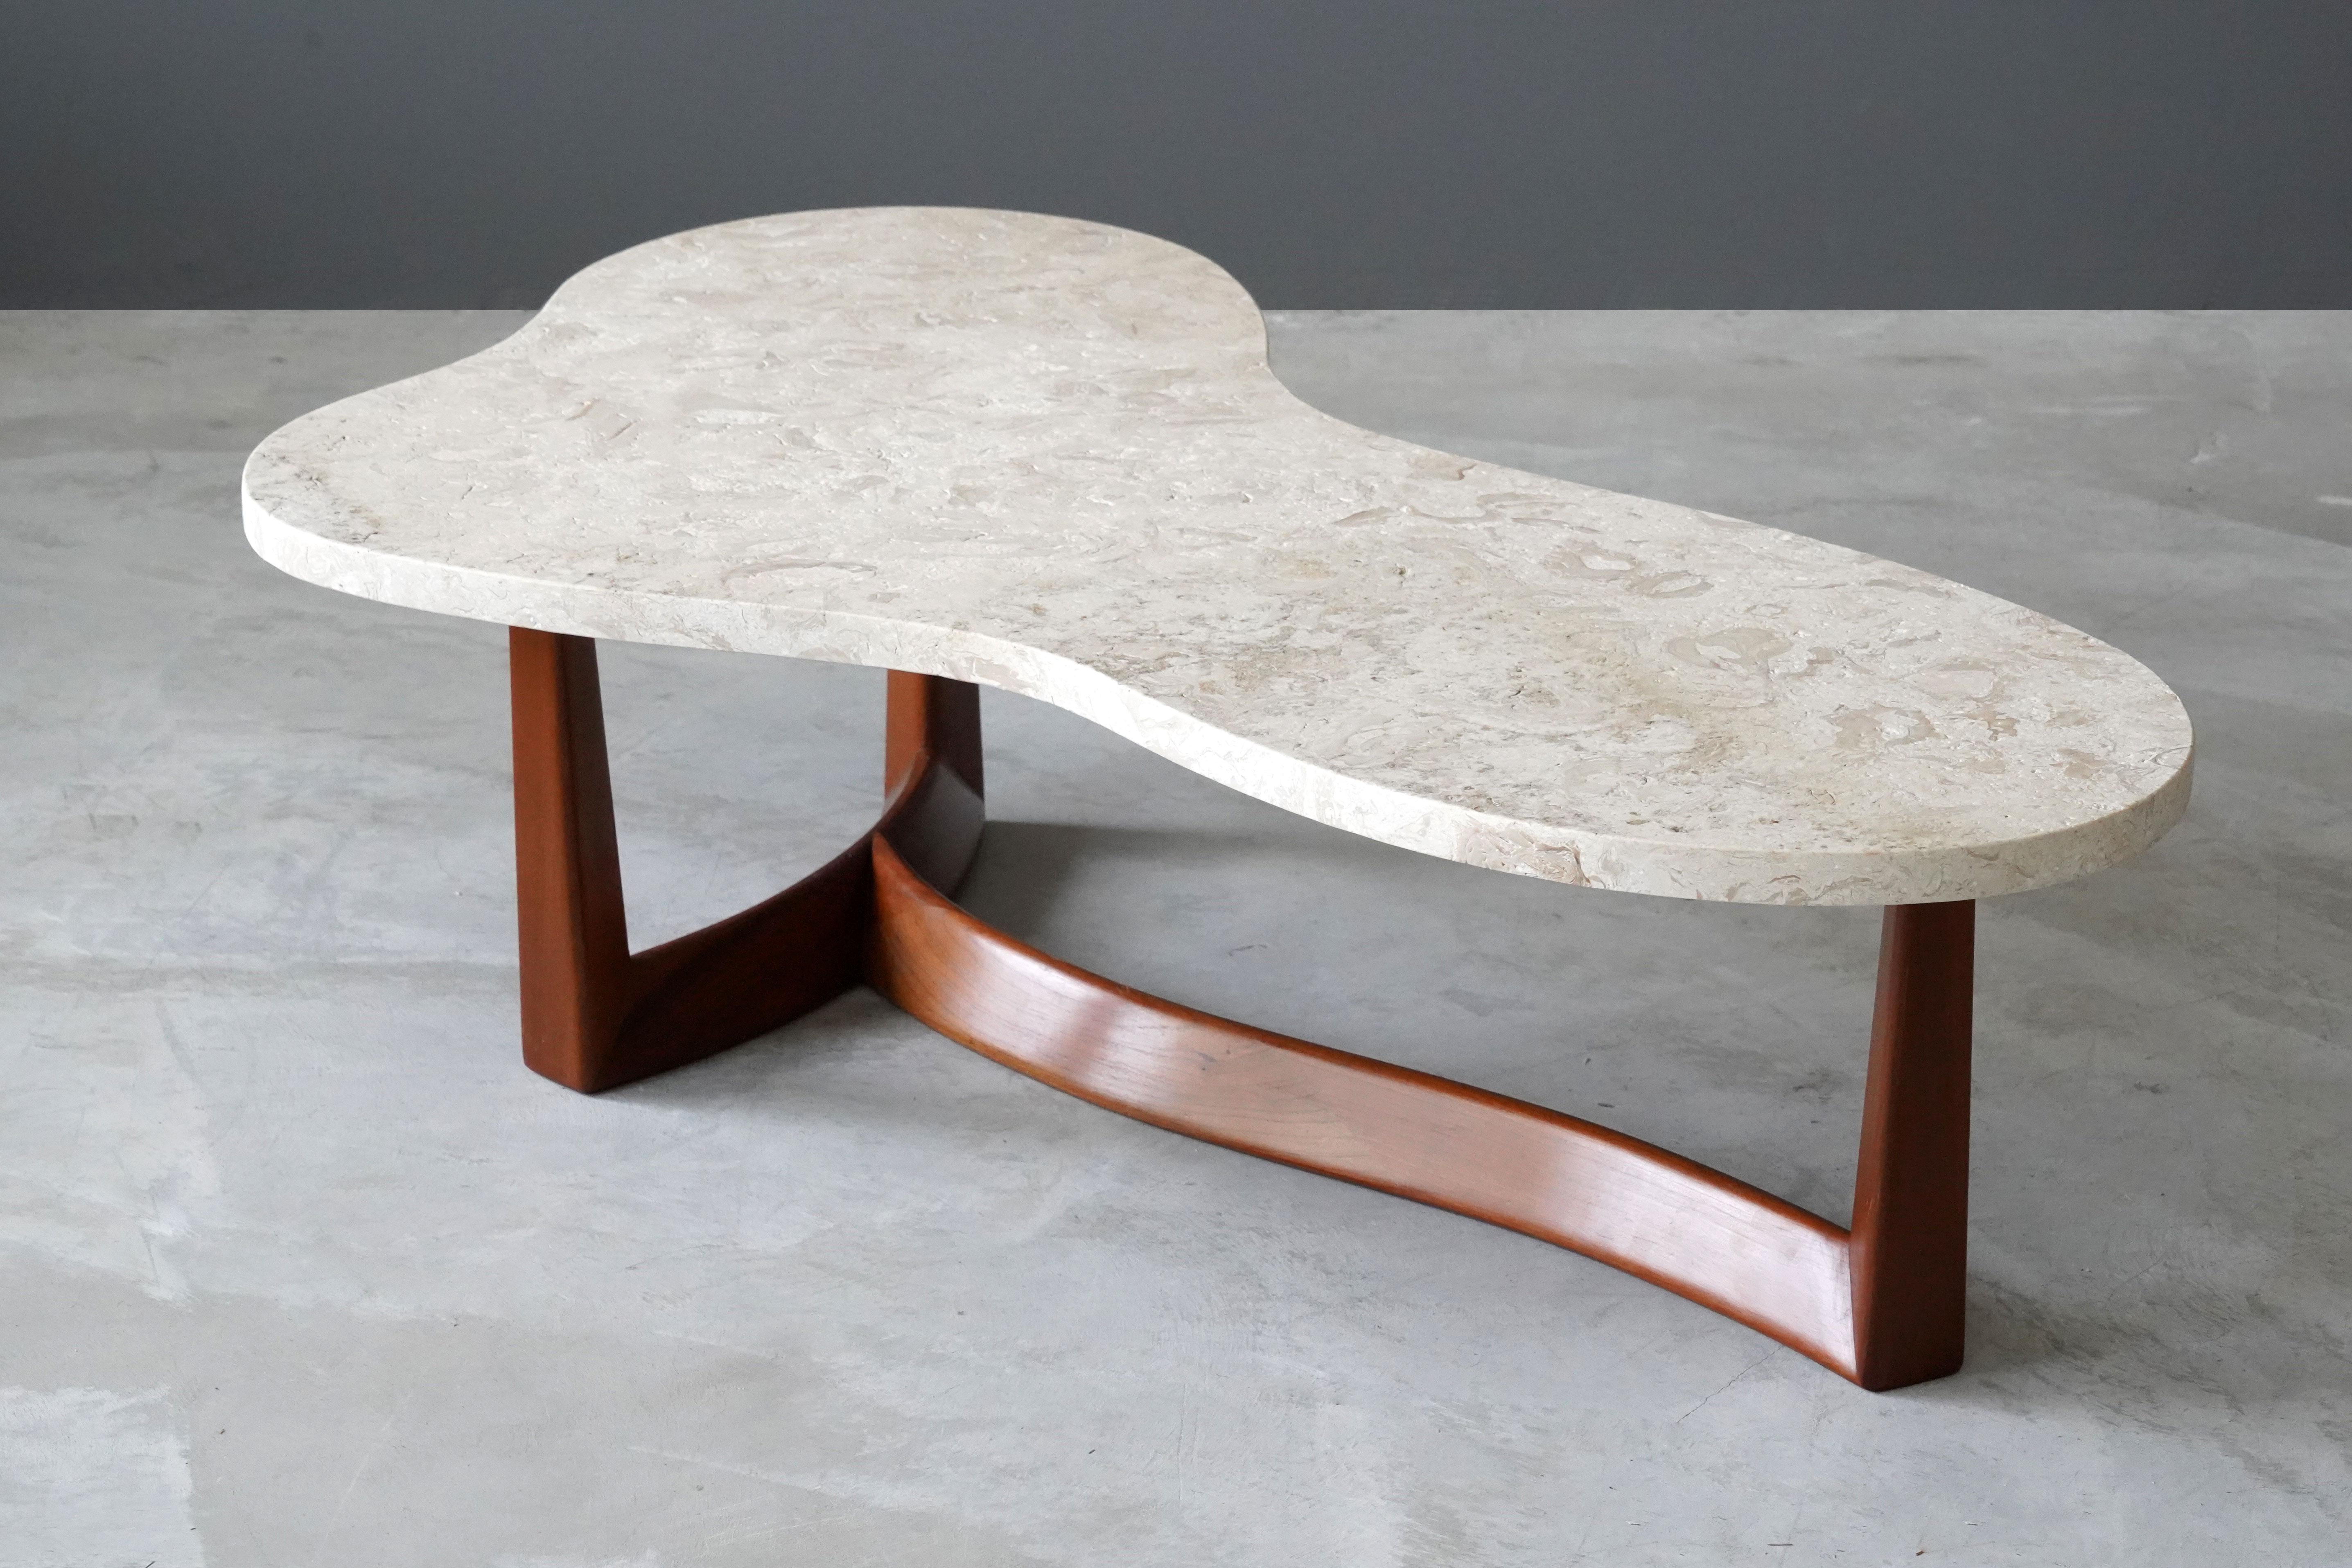 A rare and organic coffee or cocktail table. Produced in America, 1950s. The marble top rests on a finely sculpted walnut base. Possibly designed by T.H. Robsjohn-Gibbings. 

Other designers of the period include Paul Frankl, Tommi Parzinger, and